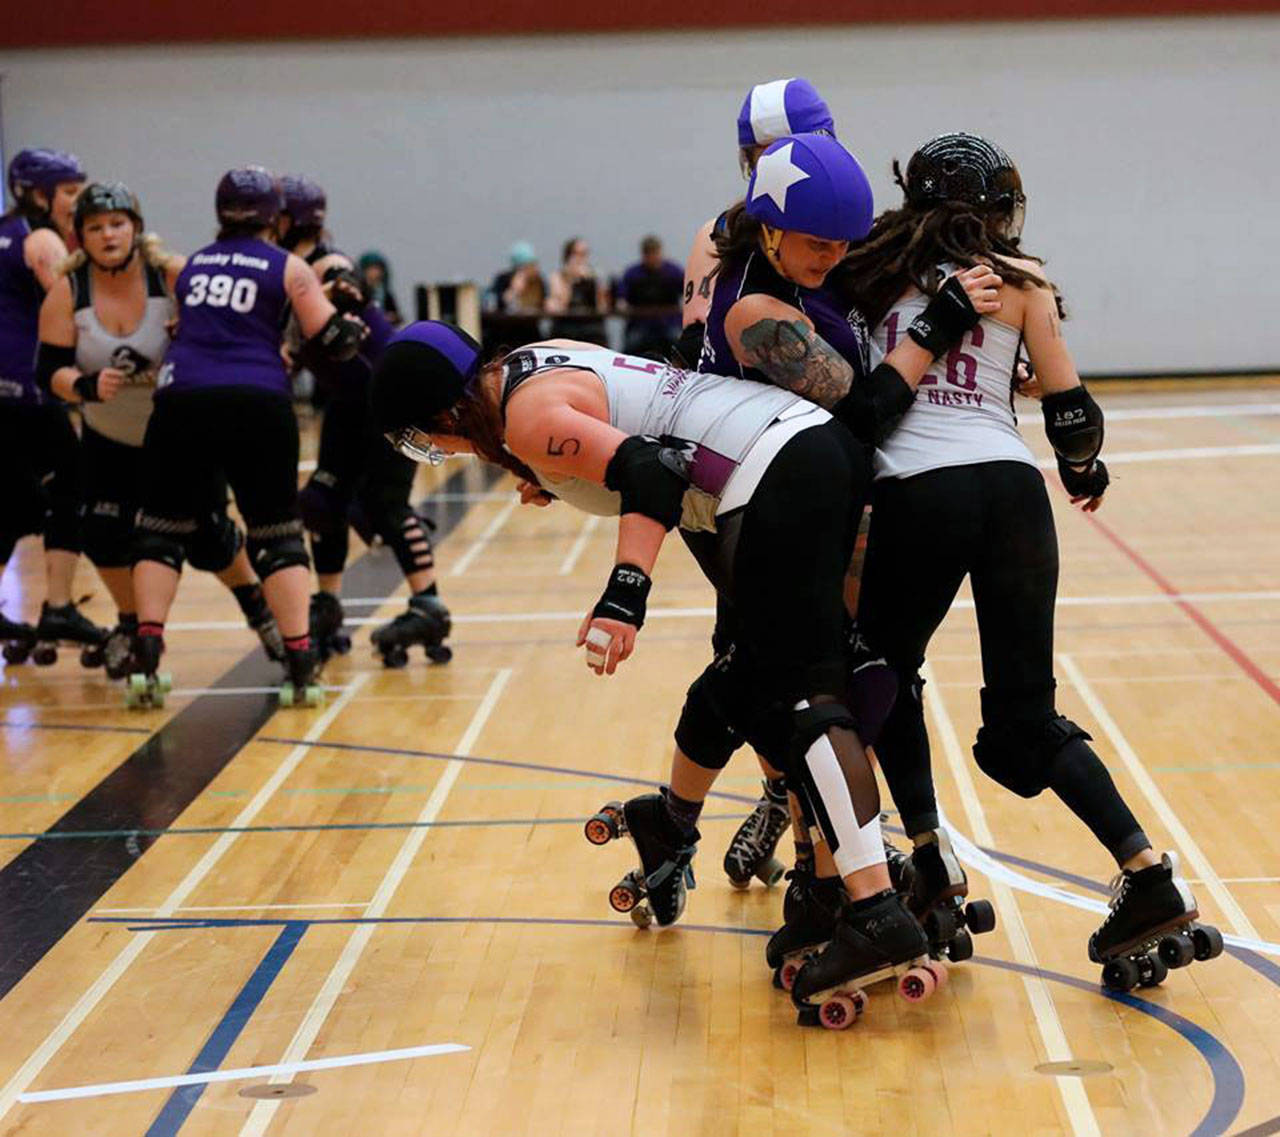 10476541_web1_180208-CAN-M-Roller-Derby1